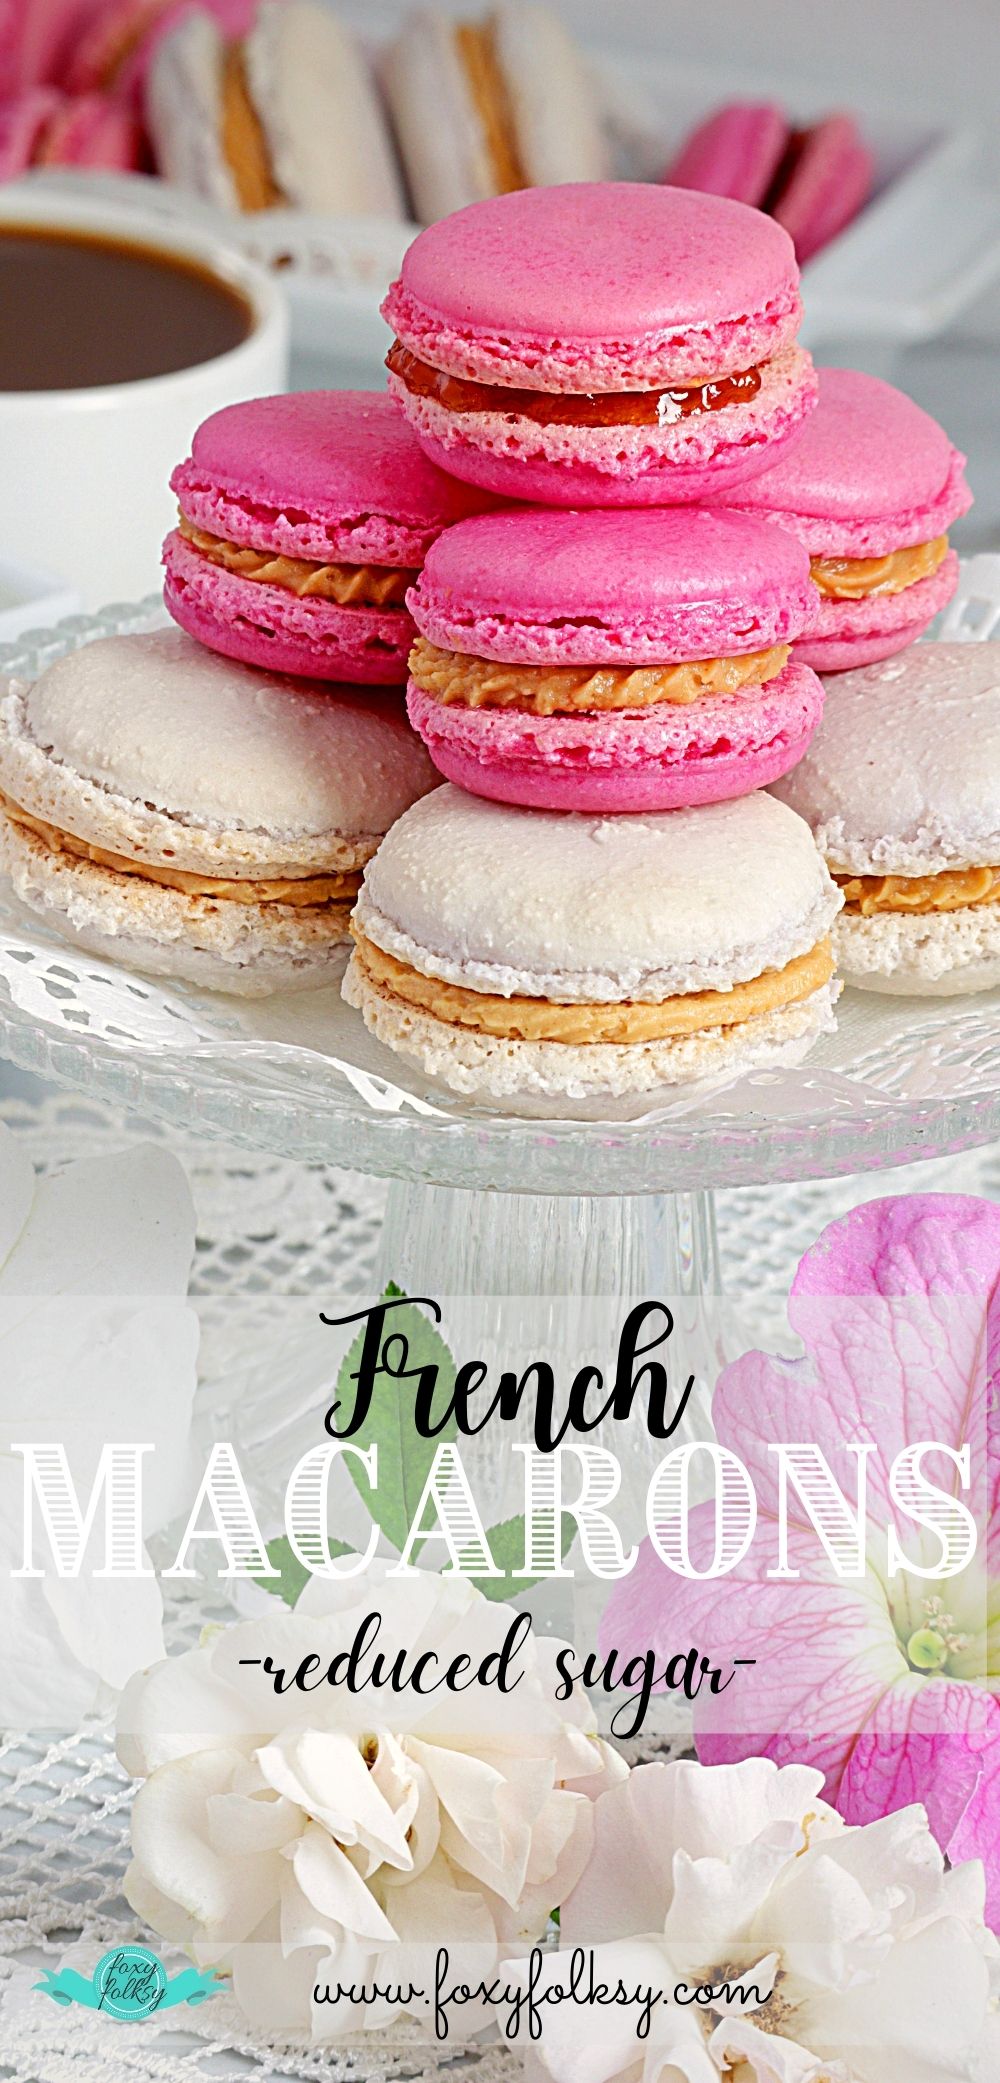 Recipe for French Macarons with reduced sugar.